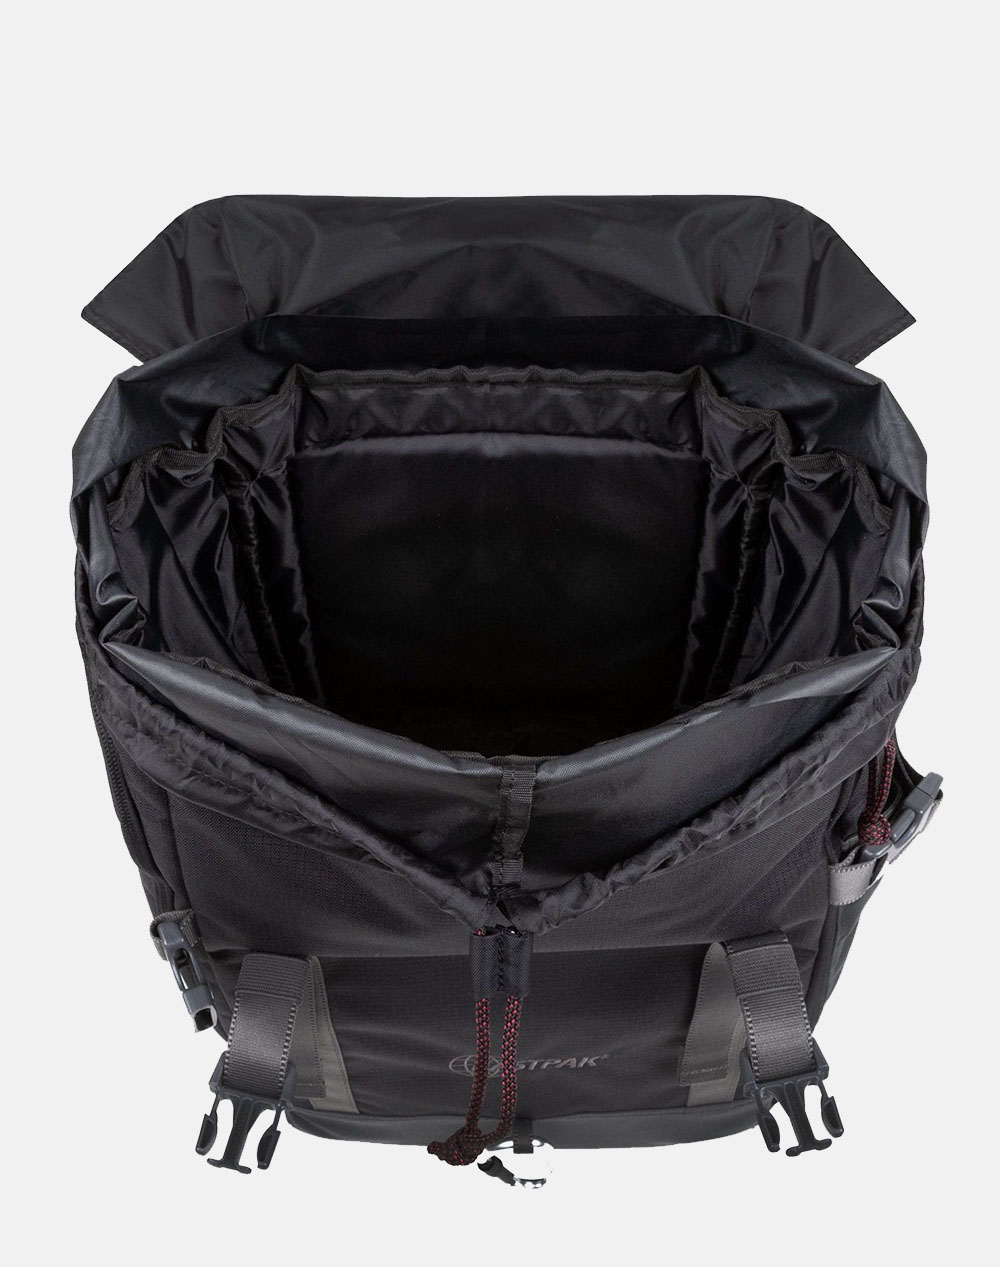 EASTPAK OUT CAMERA PACK (Rozměry: 44 x 29 x 19 cm)